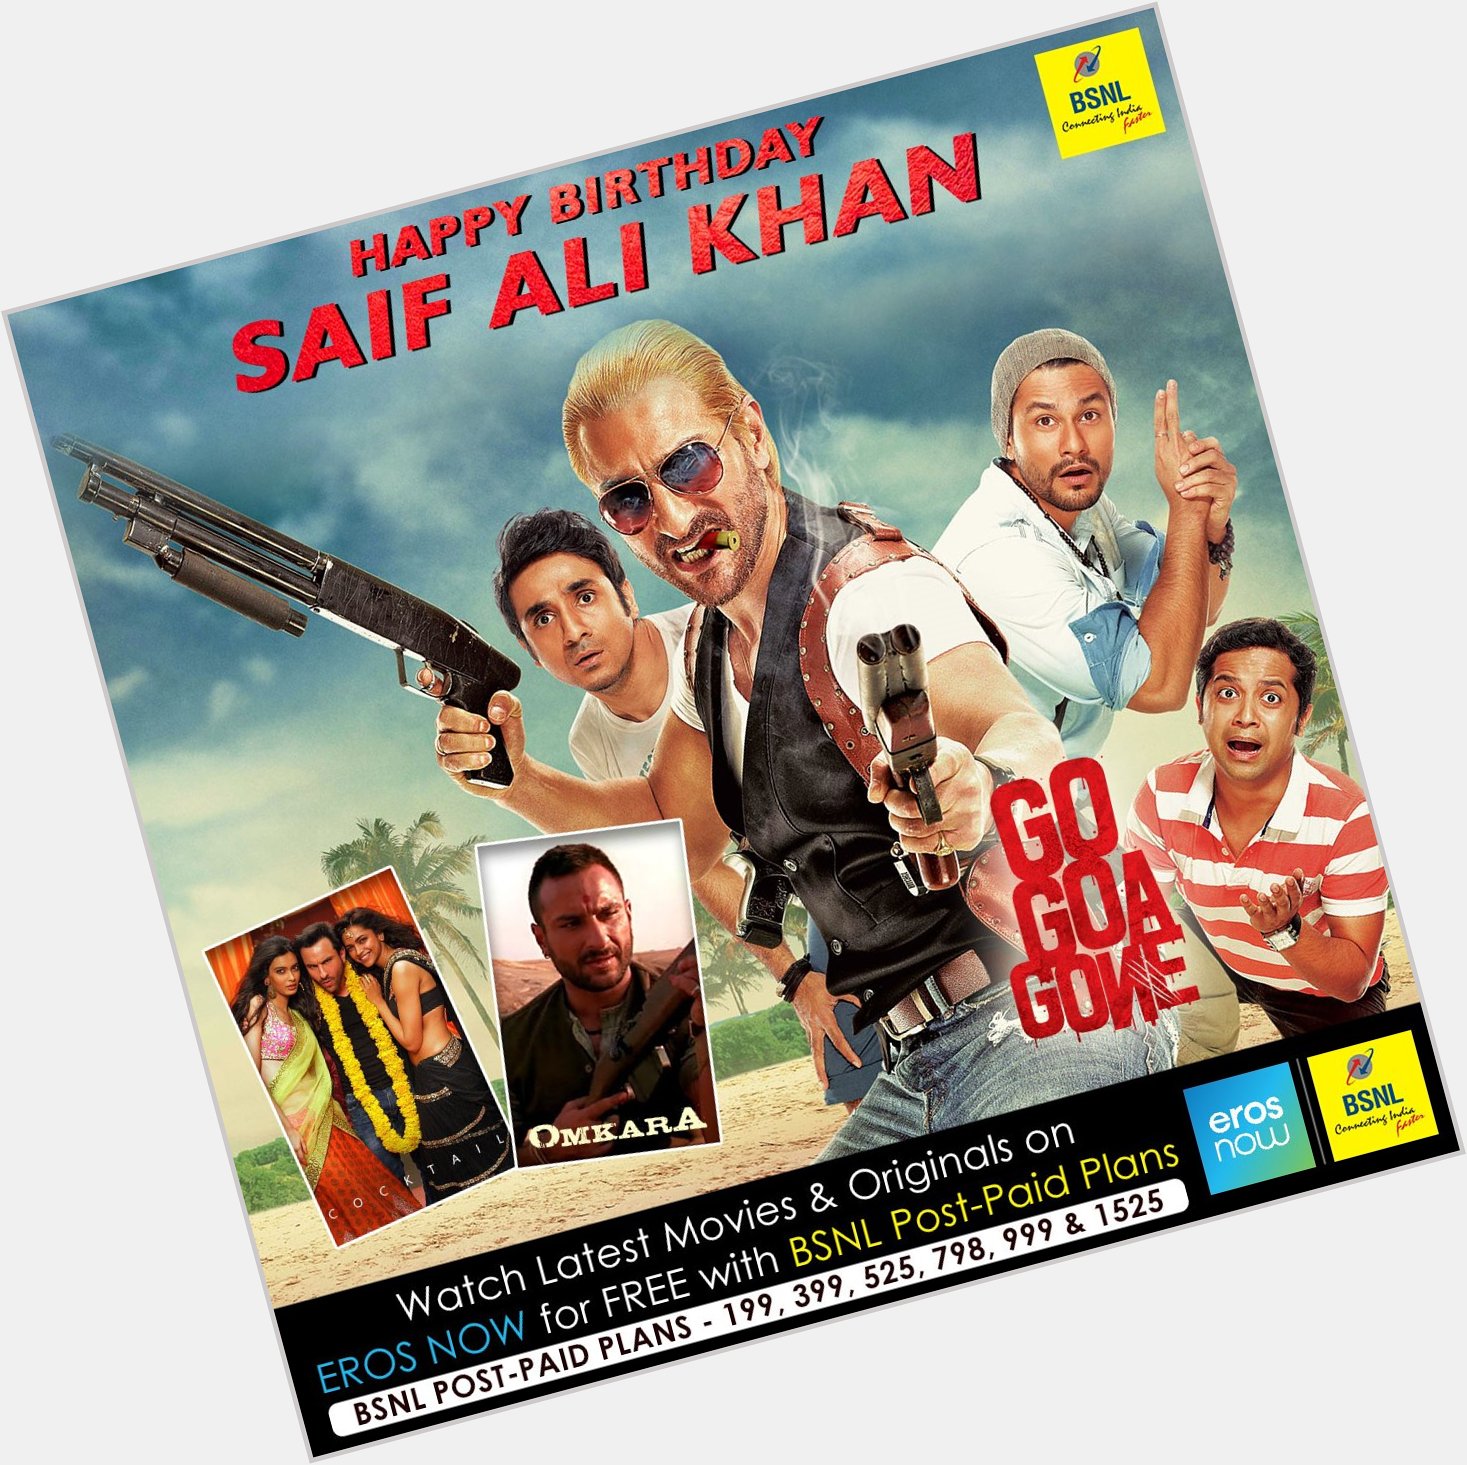 Watch latest movies and originals on NOW for FREE on BSNL post paid plans.
Happy BirthDay Saif Ali Khan. 